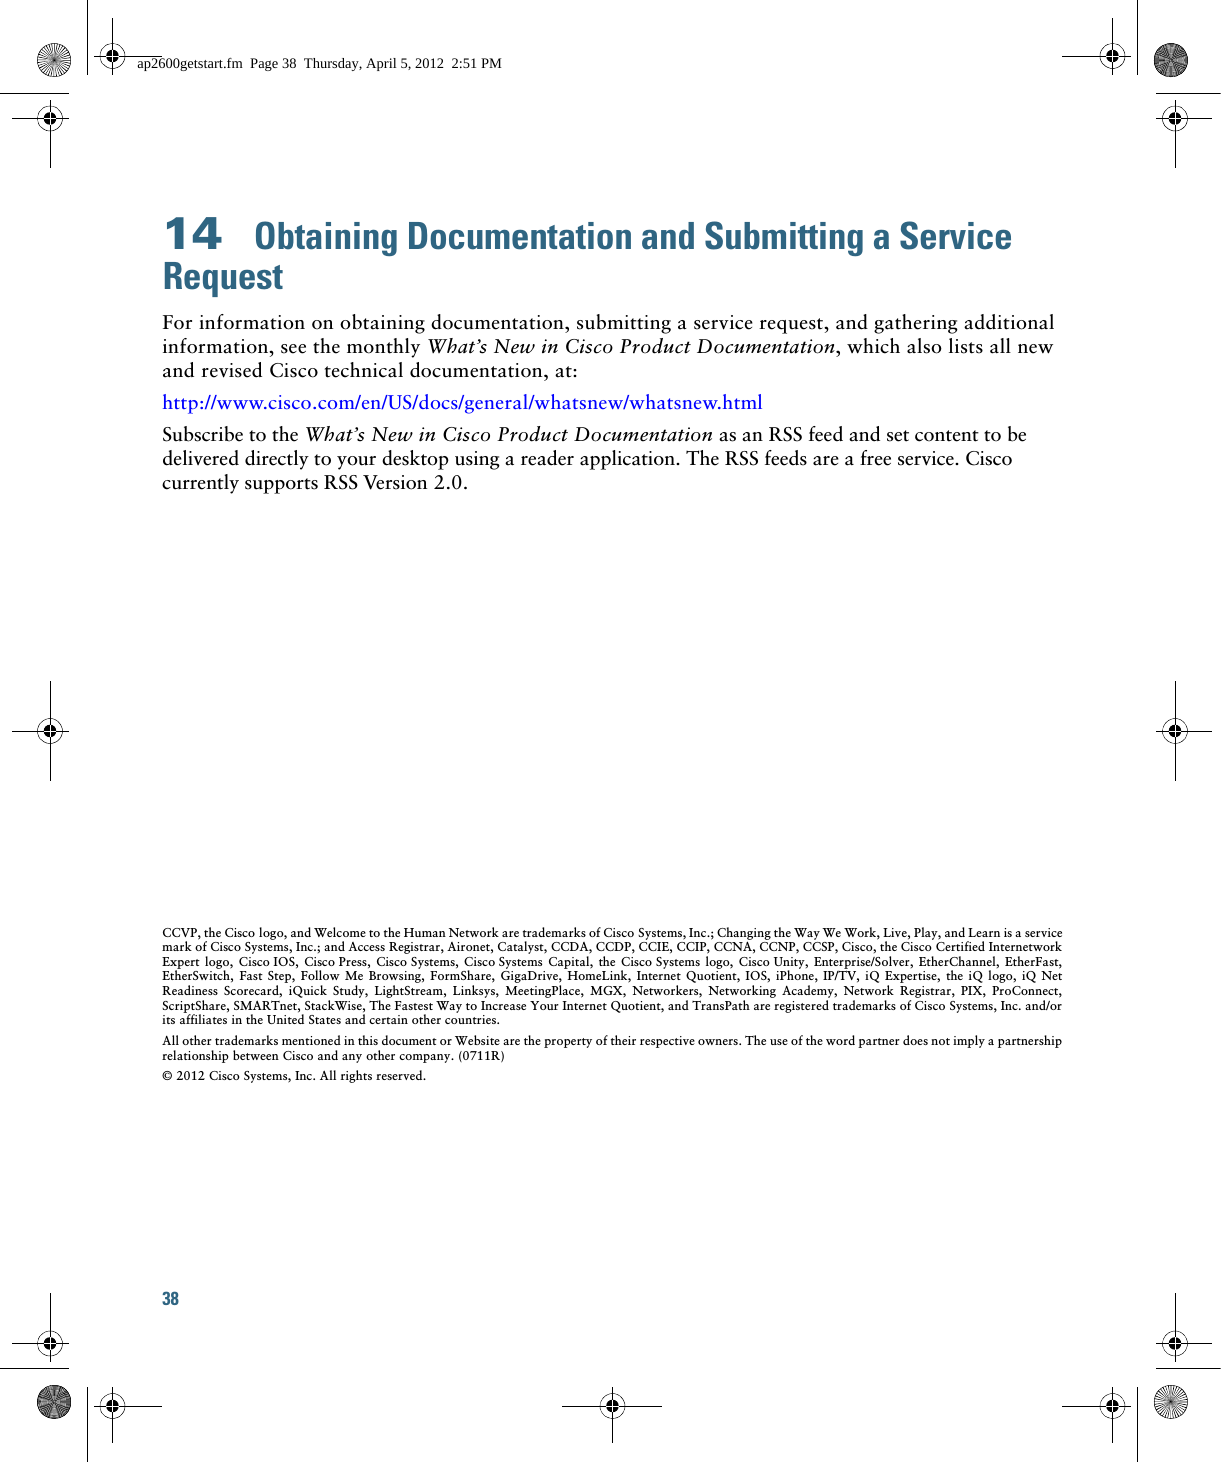 38 14  Obtaining Documentation and Submitting a Service RequestFor information on obtaining documentation, submitting a service request, and gathering additional information, see the monthly What’s New in Cisco Product Documentation, which also lists all new and revised Cisco technical documentation, at:http://www.cisco.com/en/US/docs/general/whatsnew/whatsnew.htmlSubscribe to the What’s New in Cisco Product Documentation as an RSS feed and set content to be delivered directly to your desktop using a reader application. The RSS feeds are a free service. Cisco currently supports RSS Version 2.0.CCVP, the Cisco logo, and Welcome to the Human Network are trademarks of Cisco Systems, Inc.; Changing the Way We Work, Live, Play, and Learn is a service mark of Cisco Systems, Inc.; and Access Registrar, Aironet, Catalyst, CCDA, CCDP, CCIE, CCIP, CCNA, CCNP, CCSP, Cisco, the Cisco Certified Internetwork Expert logo, Cisco IOS, Cisco Press, Cisco Systems, Cisco Systems Capital, the Cisco Systems logo, Cisco Unity, Enterprise/Solver, EtherChannel, EtherFast, EtherSwitch, Fast Step, Follow Me Browsing, FormShare, GigaDrive, HomeLink, Internet Quotient, IOS, iPhone, IP/TV, iQ Expertise, the iQ logo, iQ Net Readiness Scorecard, iQuick Study, LightStream, Linksys, MeetingPlace, MGX, Networkers, Networking Academy, Network Registrar, PIX, ProConnect, ScriptShare, SMARTnet, StackWise, The Fastest Way to Increase Your Internet Quotient, and TransPath are registered trademarks of Cisco Systems, Inc. and/or its affiliates in the United States and certain other countries. All other trademarks mentioned in this document or Website are the property of their respective owners. The use of the word partner does not imply a partnership relationship between Cisco and any other company. (0711R)© 2012 Cisco Systems, Inc. All rights reserved.ap2600getstart.fm  Page 38  Thursday, April 5, 2012  2:51 PM